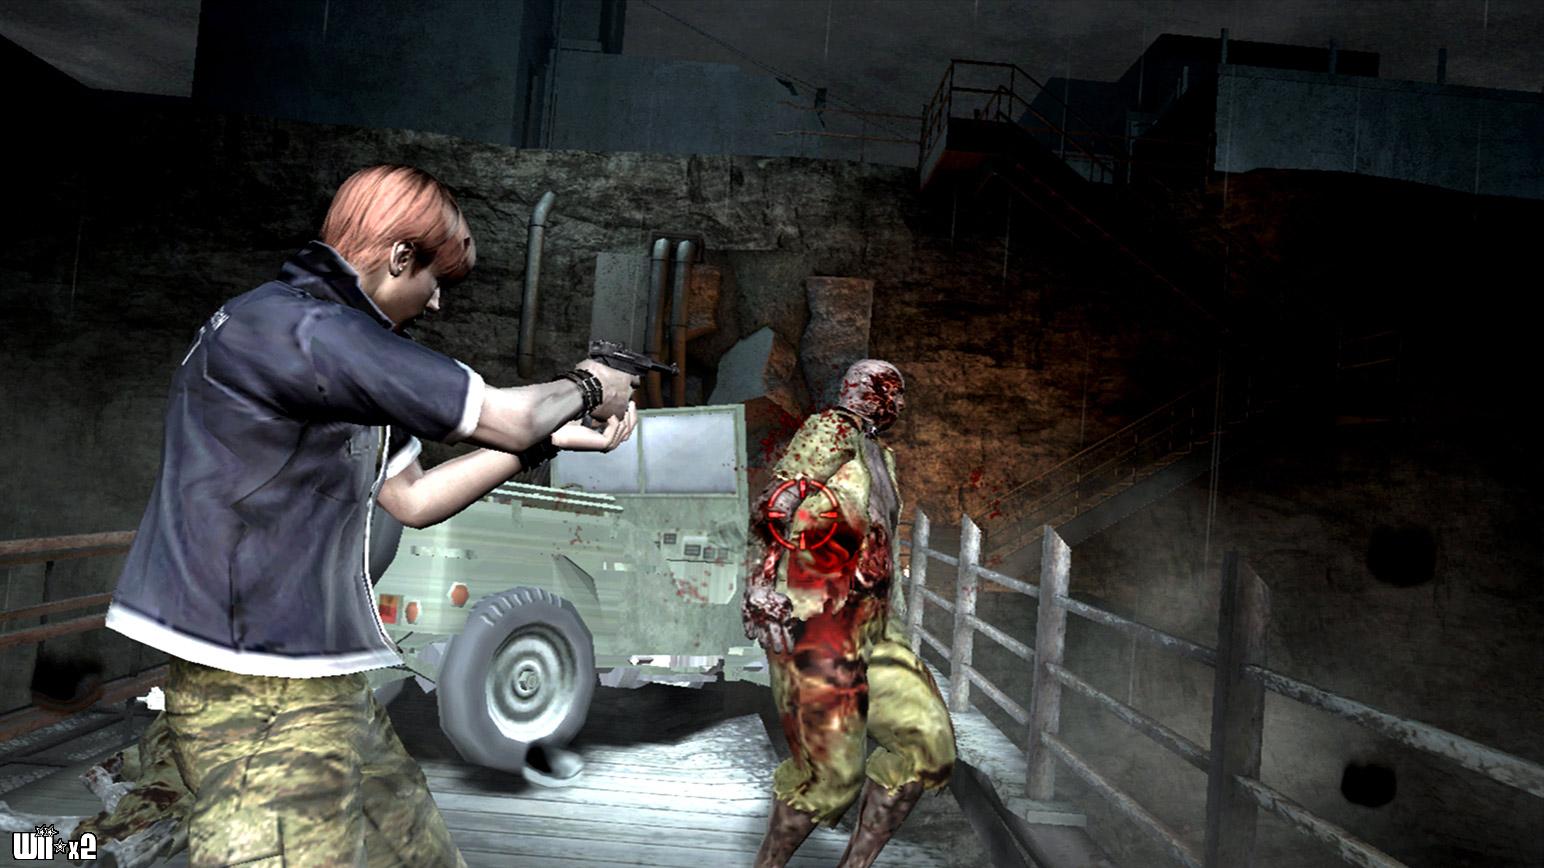 Screenshots of Resident Evil: The Darkside Chronicles for Wii